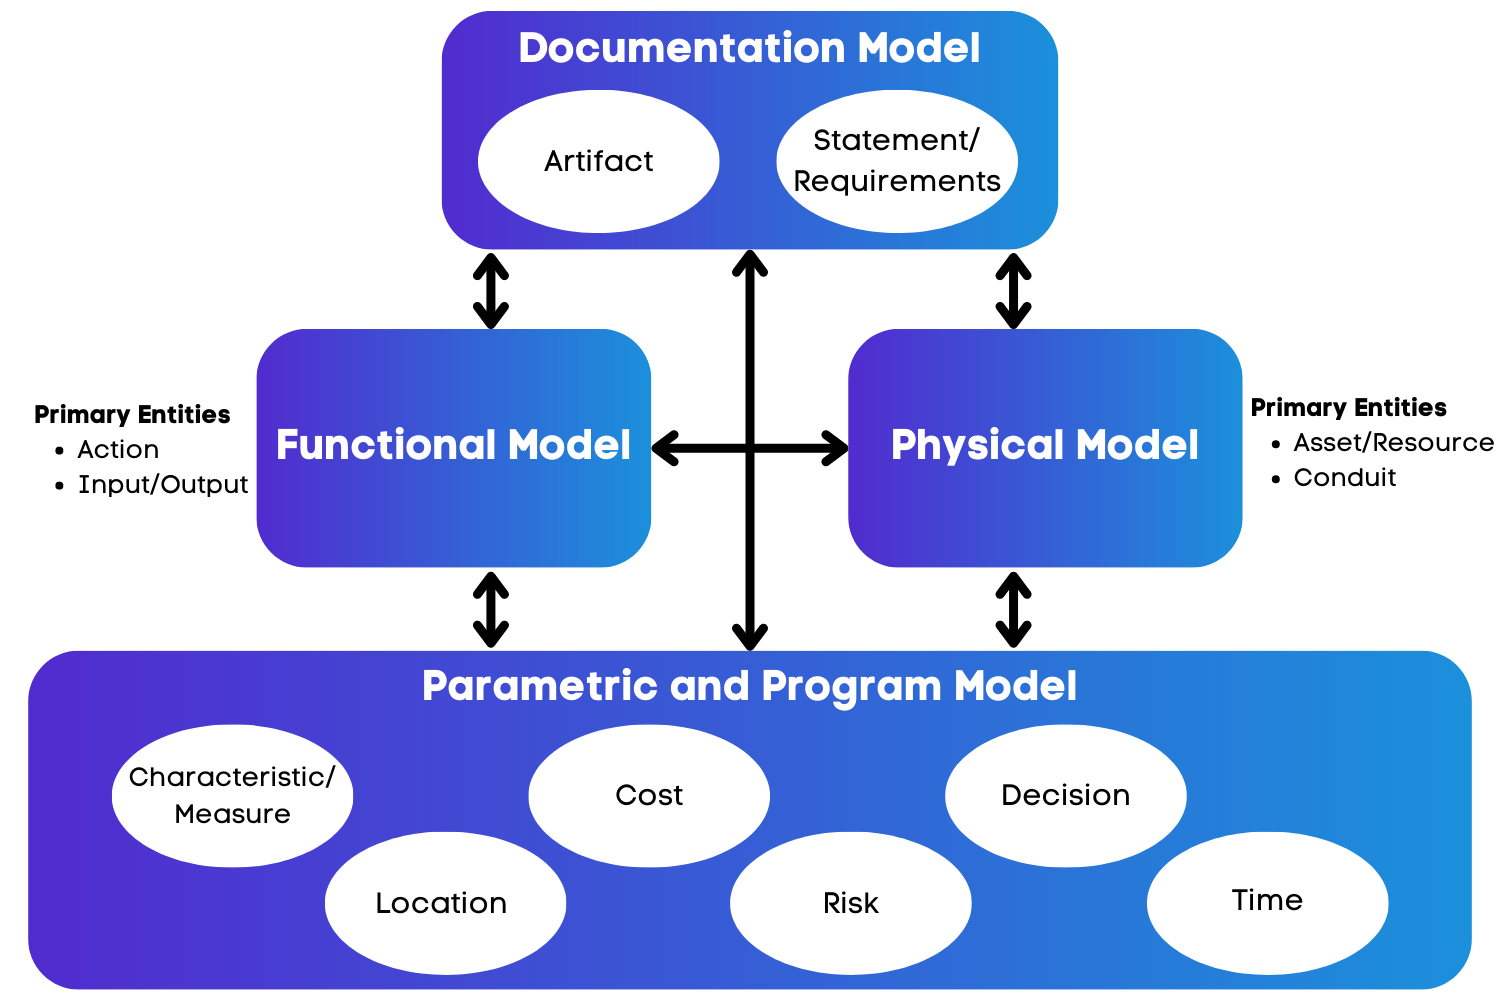 Connection between Documentation model, functional model, physical model, and parametric & program model